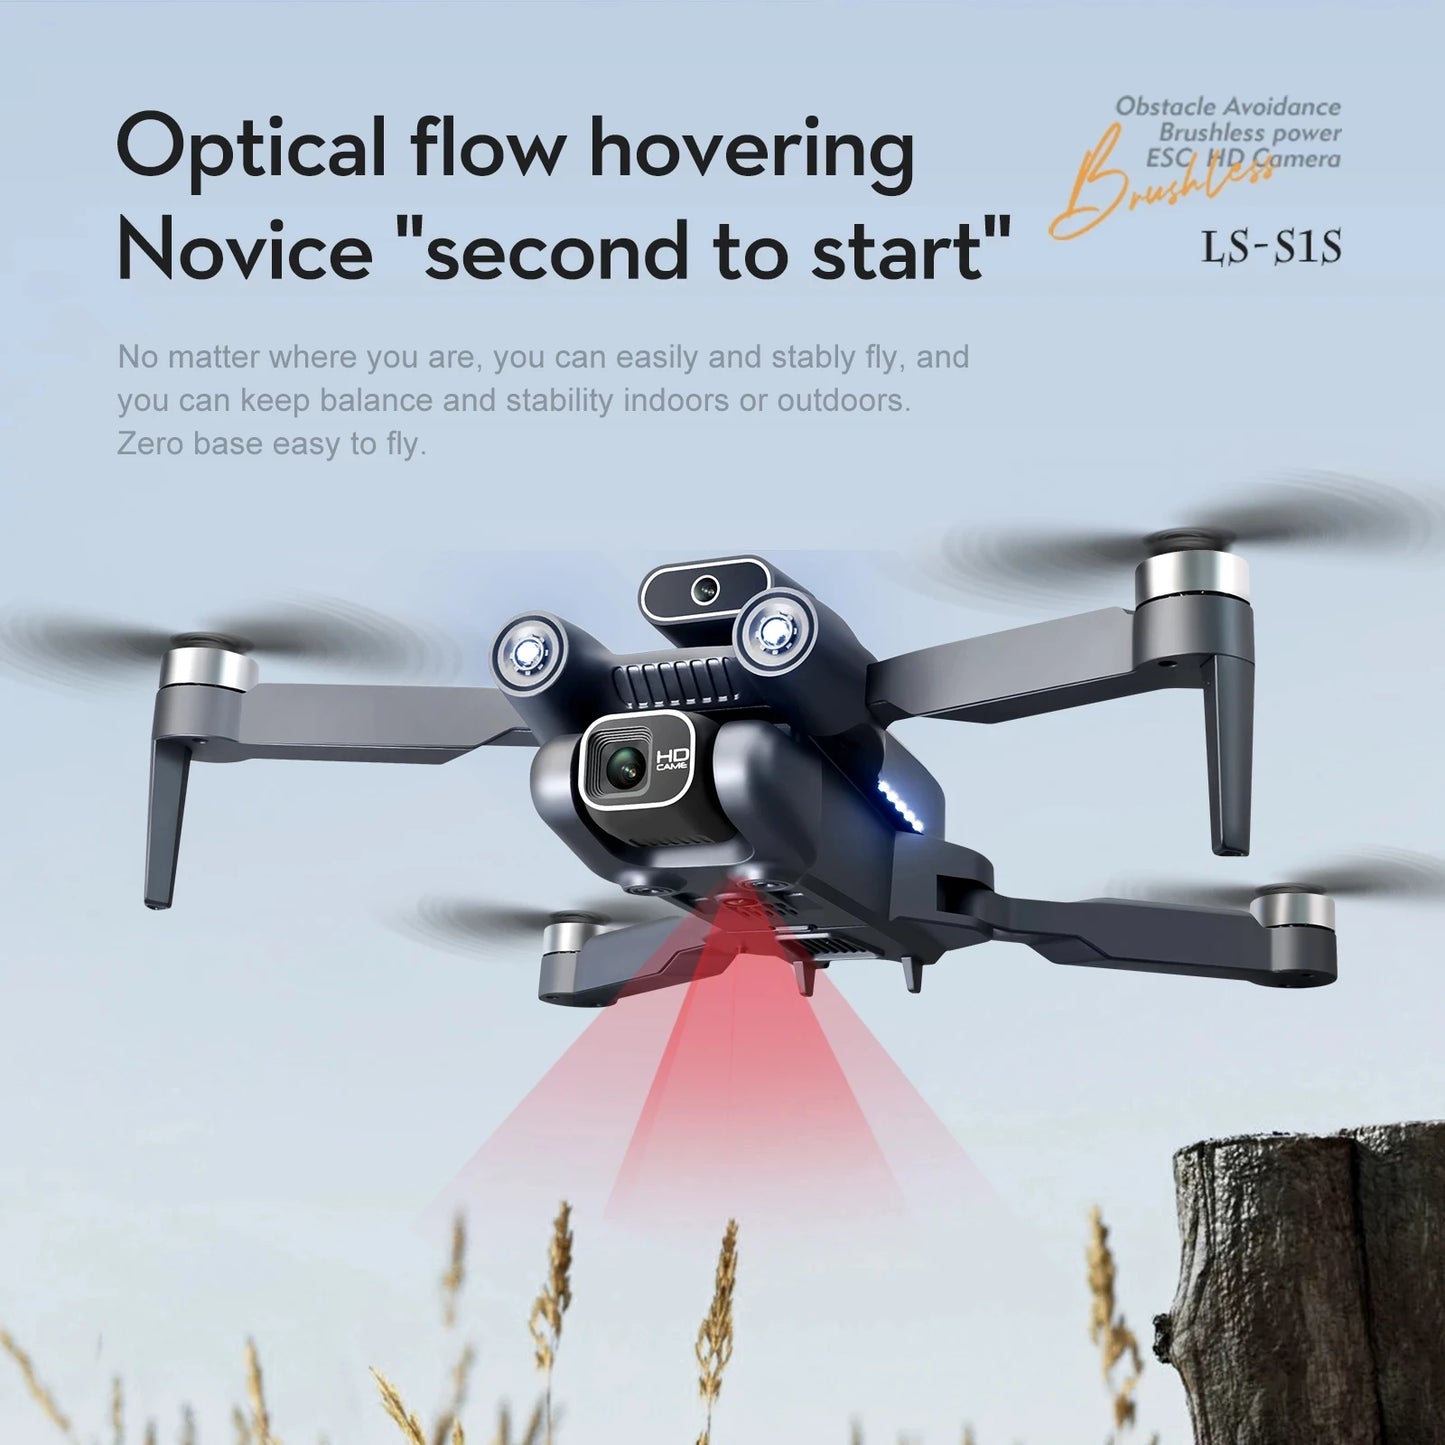 Drone HD Camera obstacle avoidance